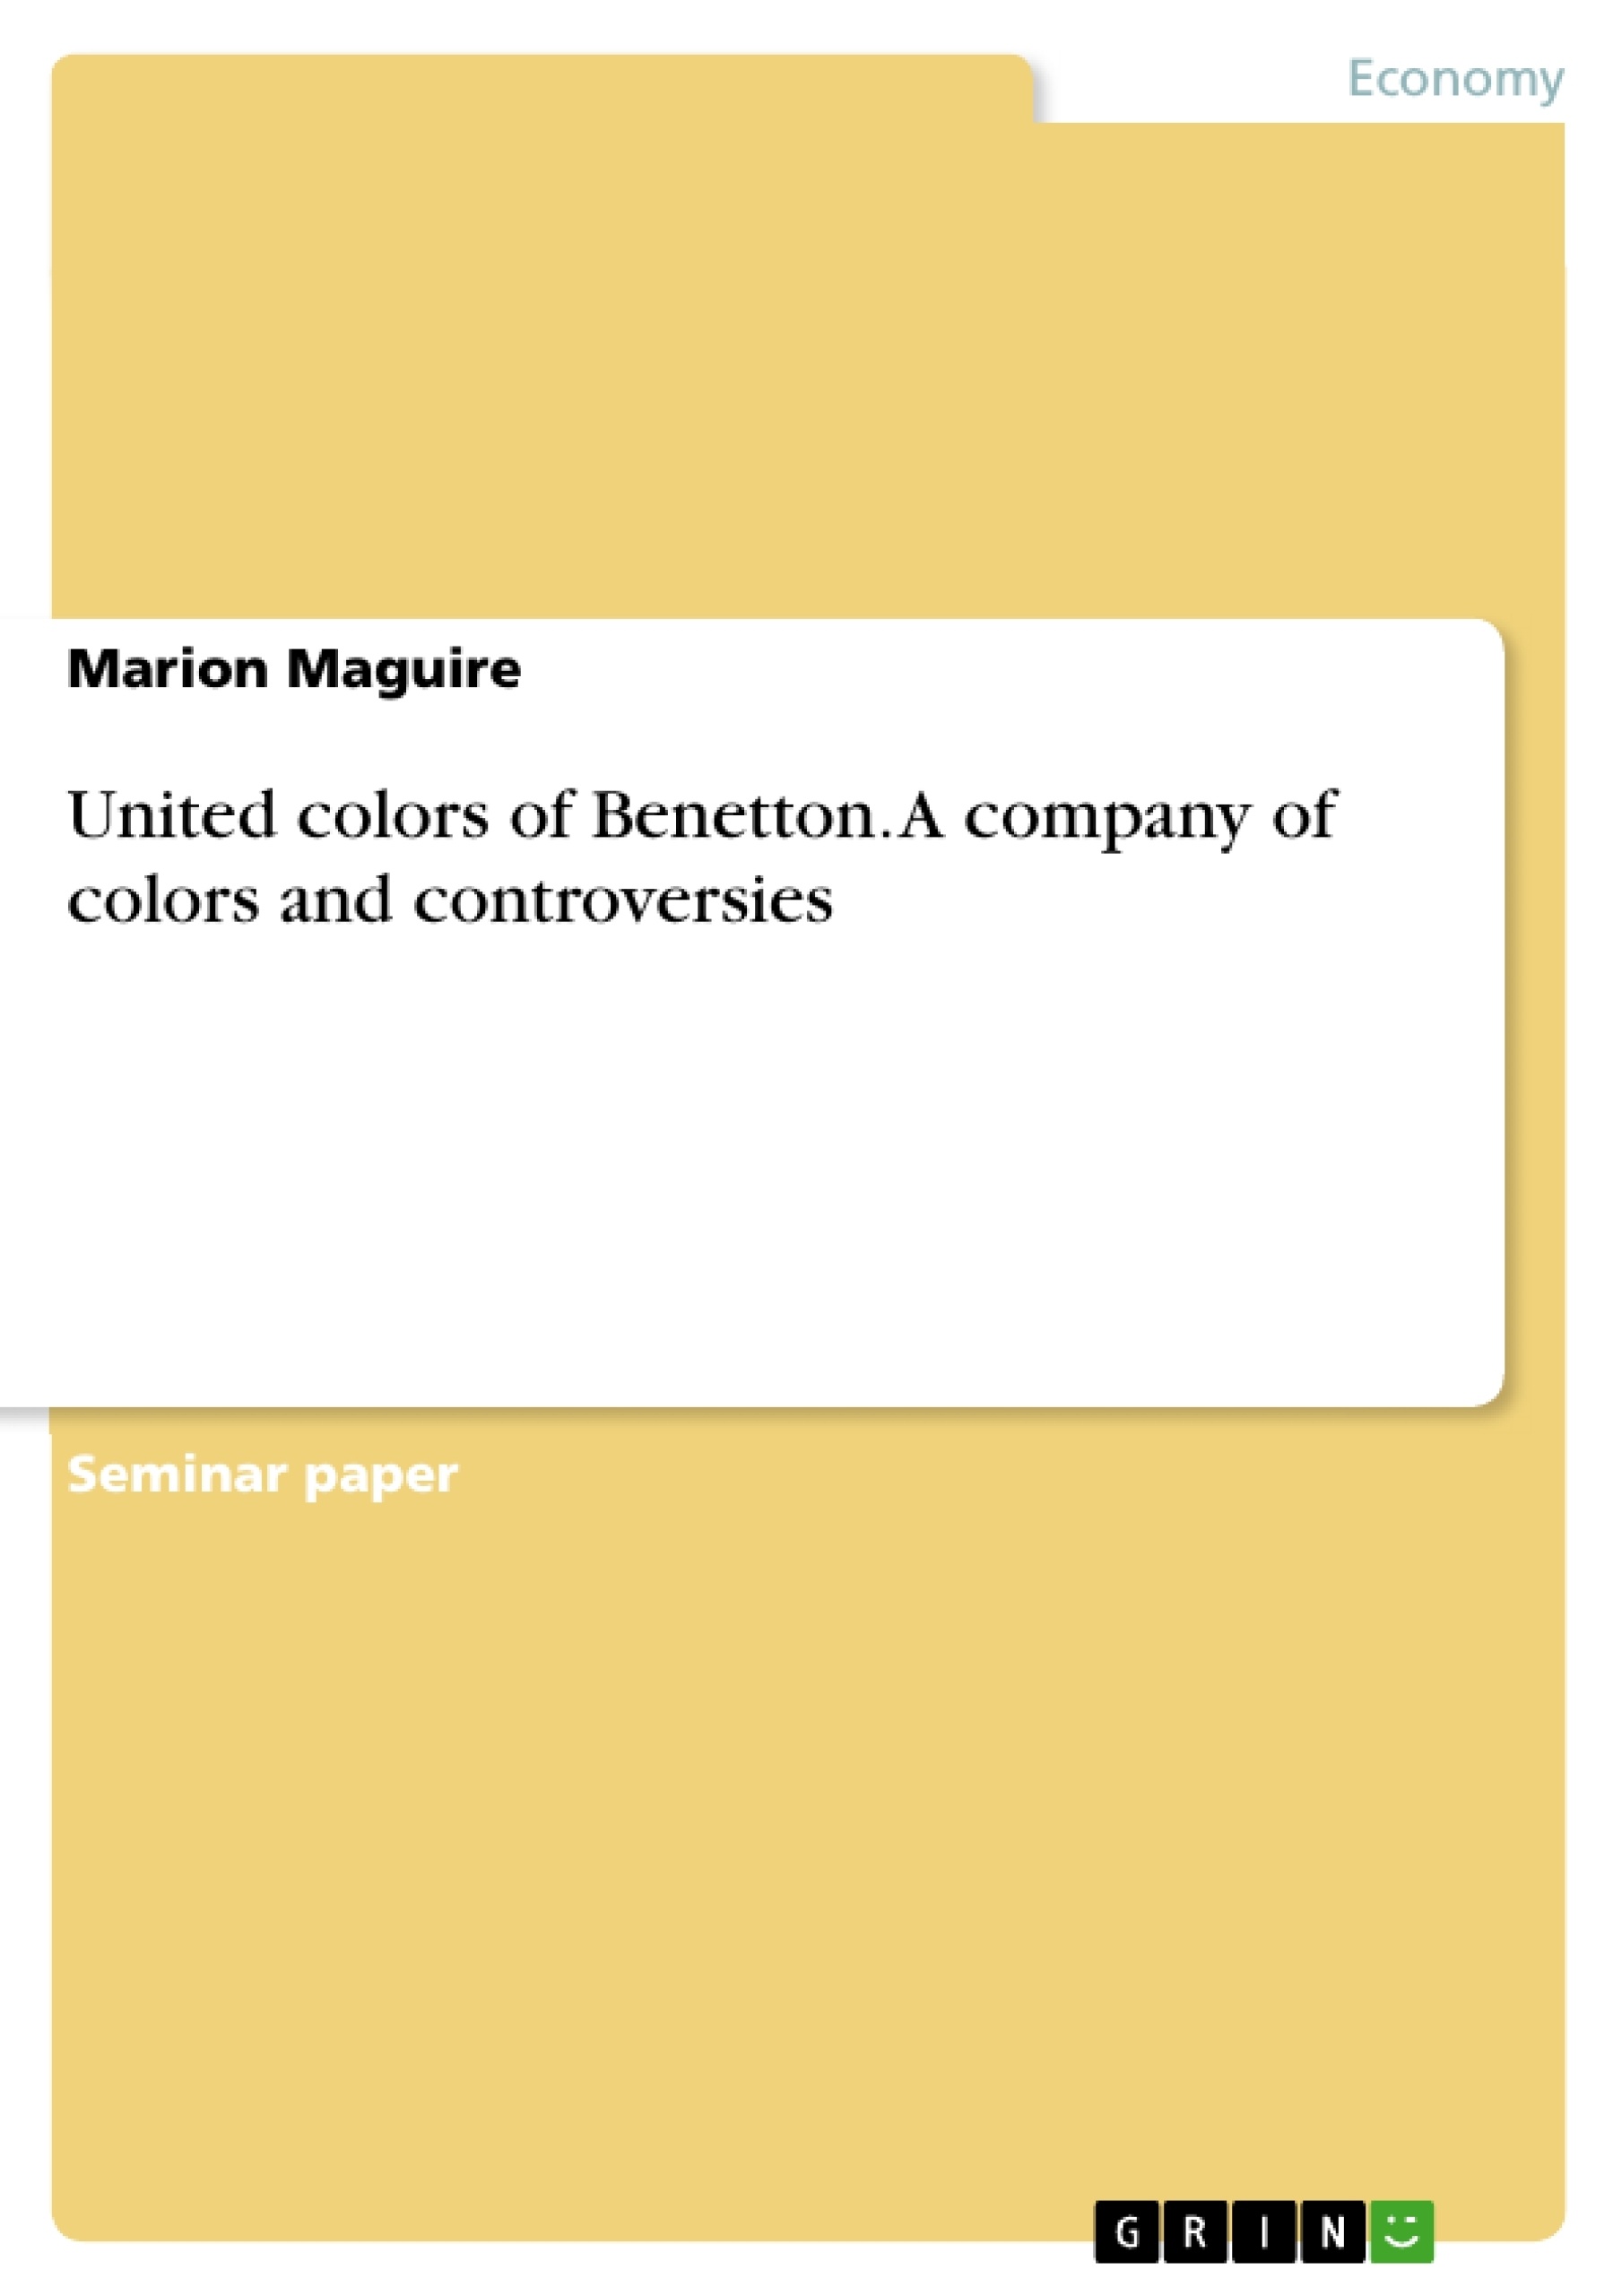 Title: United colors of Benetton. A company of colors and controversies